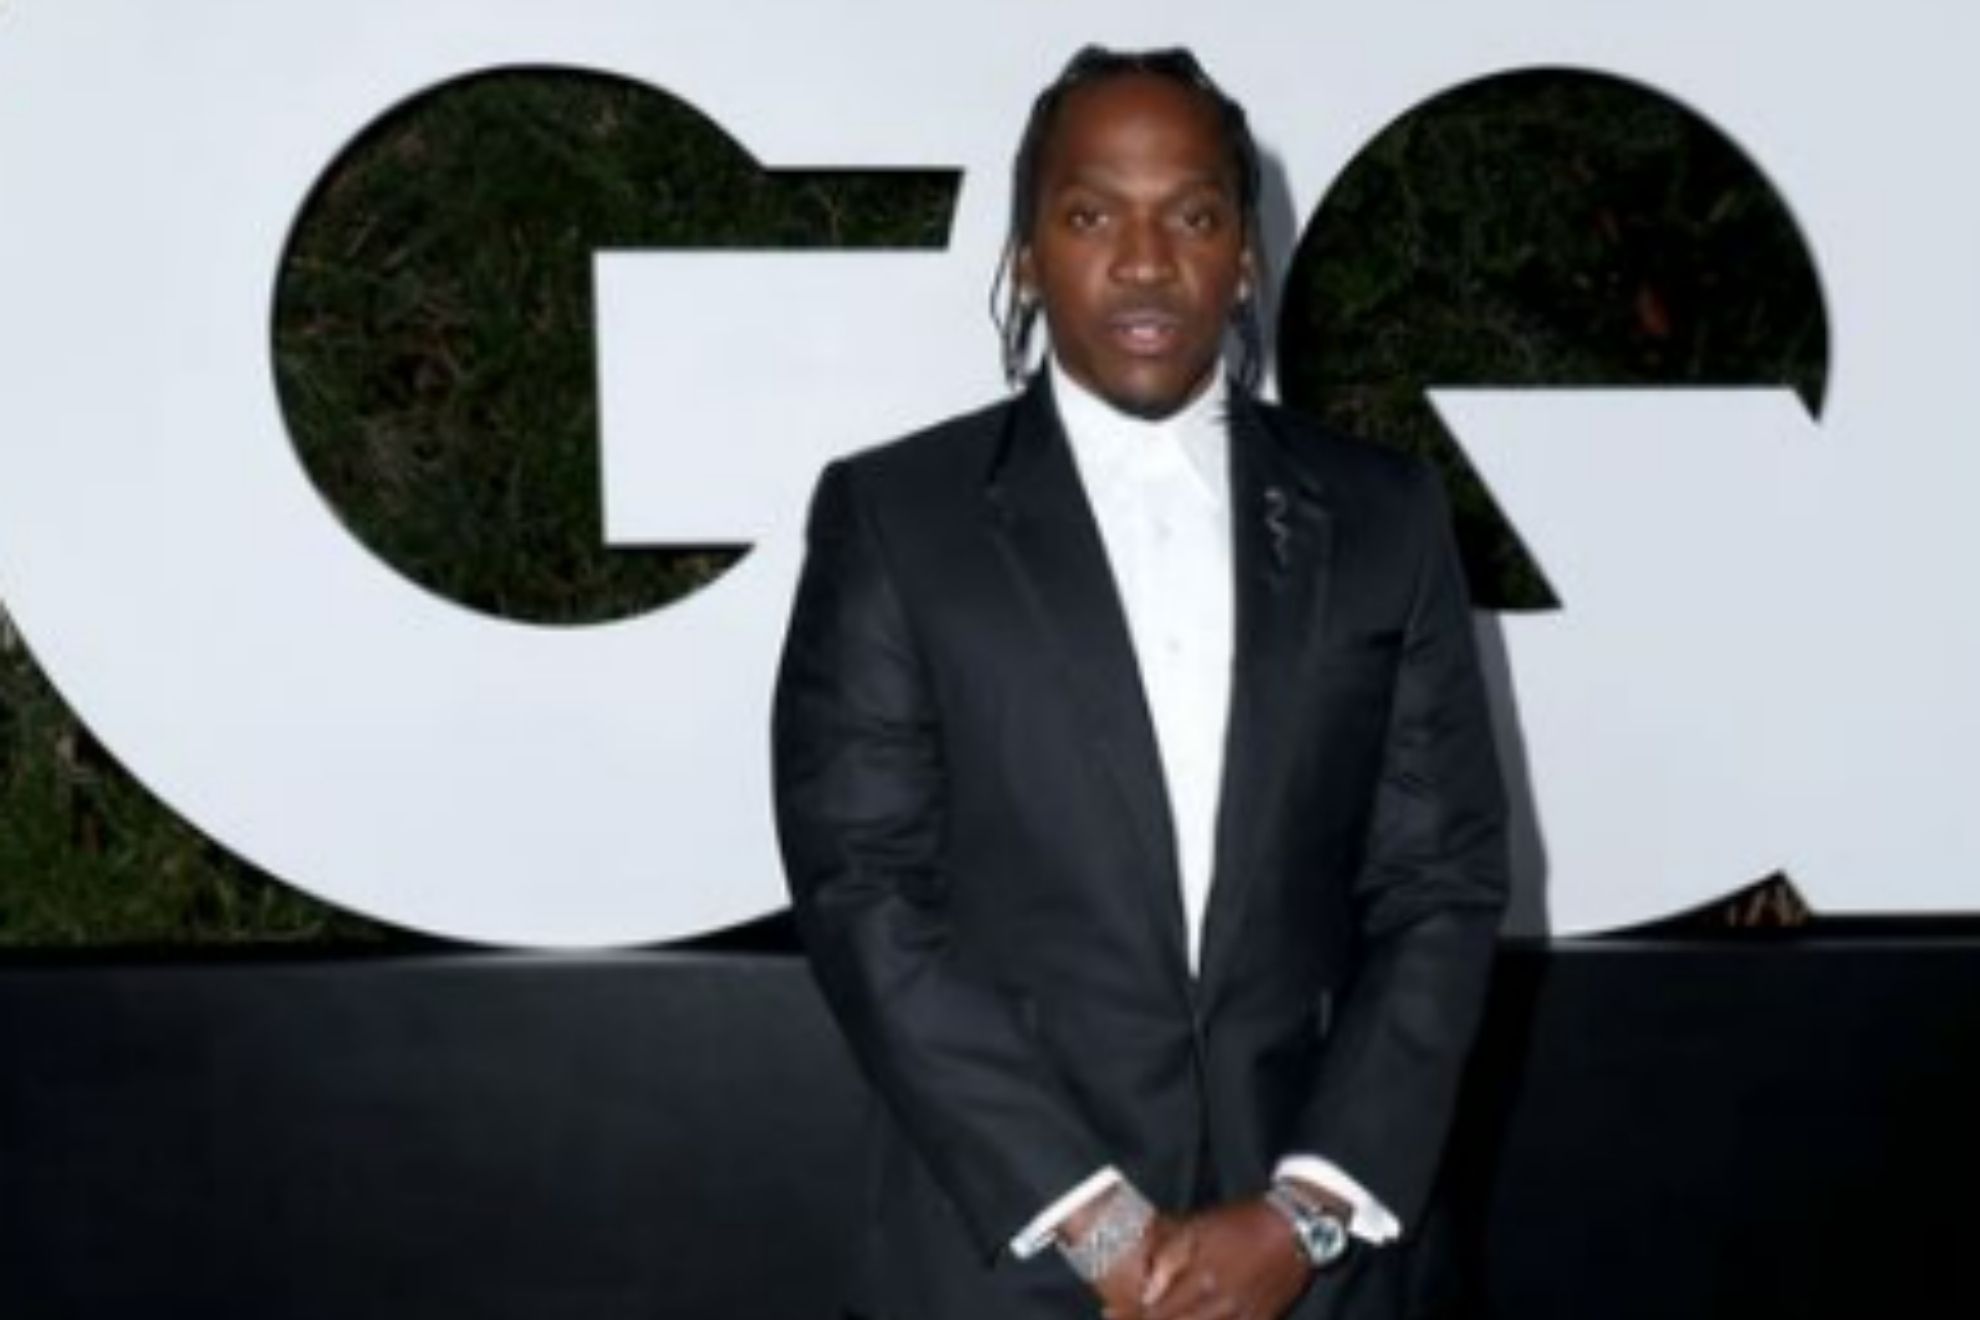 Pusha T goes on the record and says he is disappointed by Kanye West's "Hate Speech"